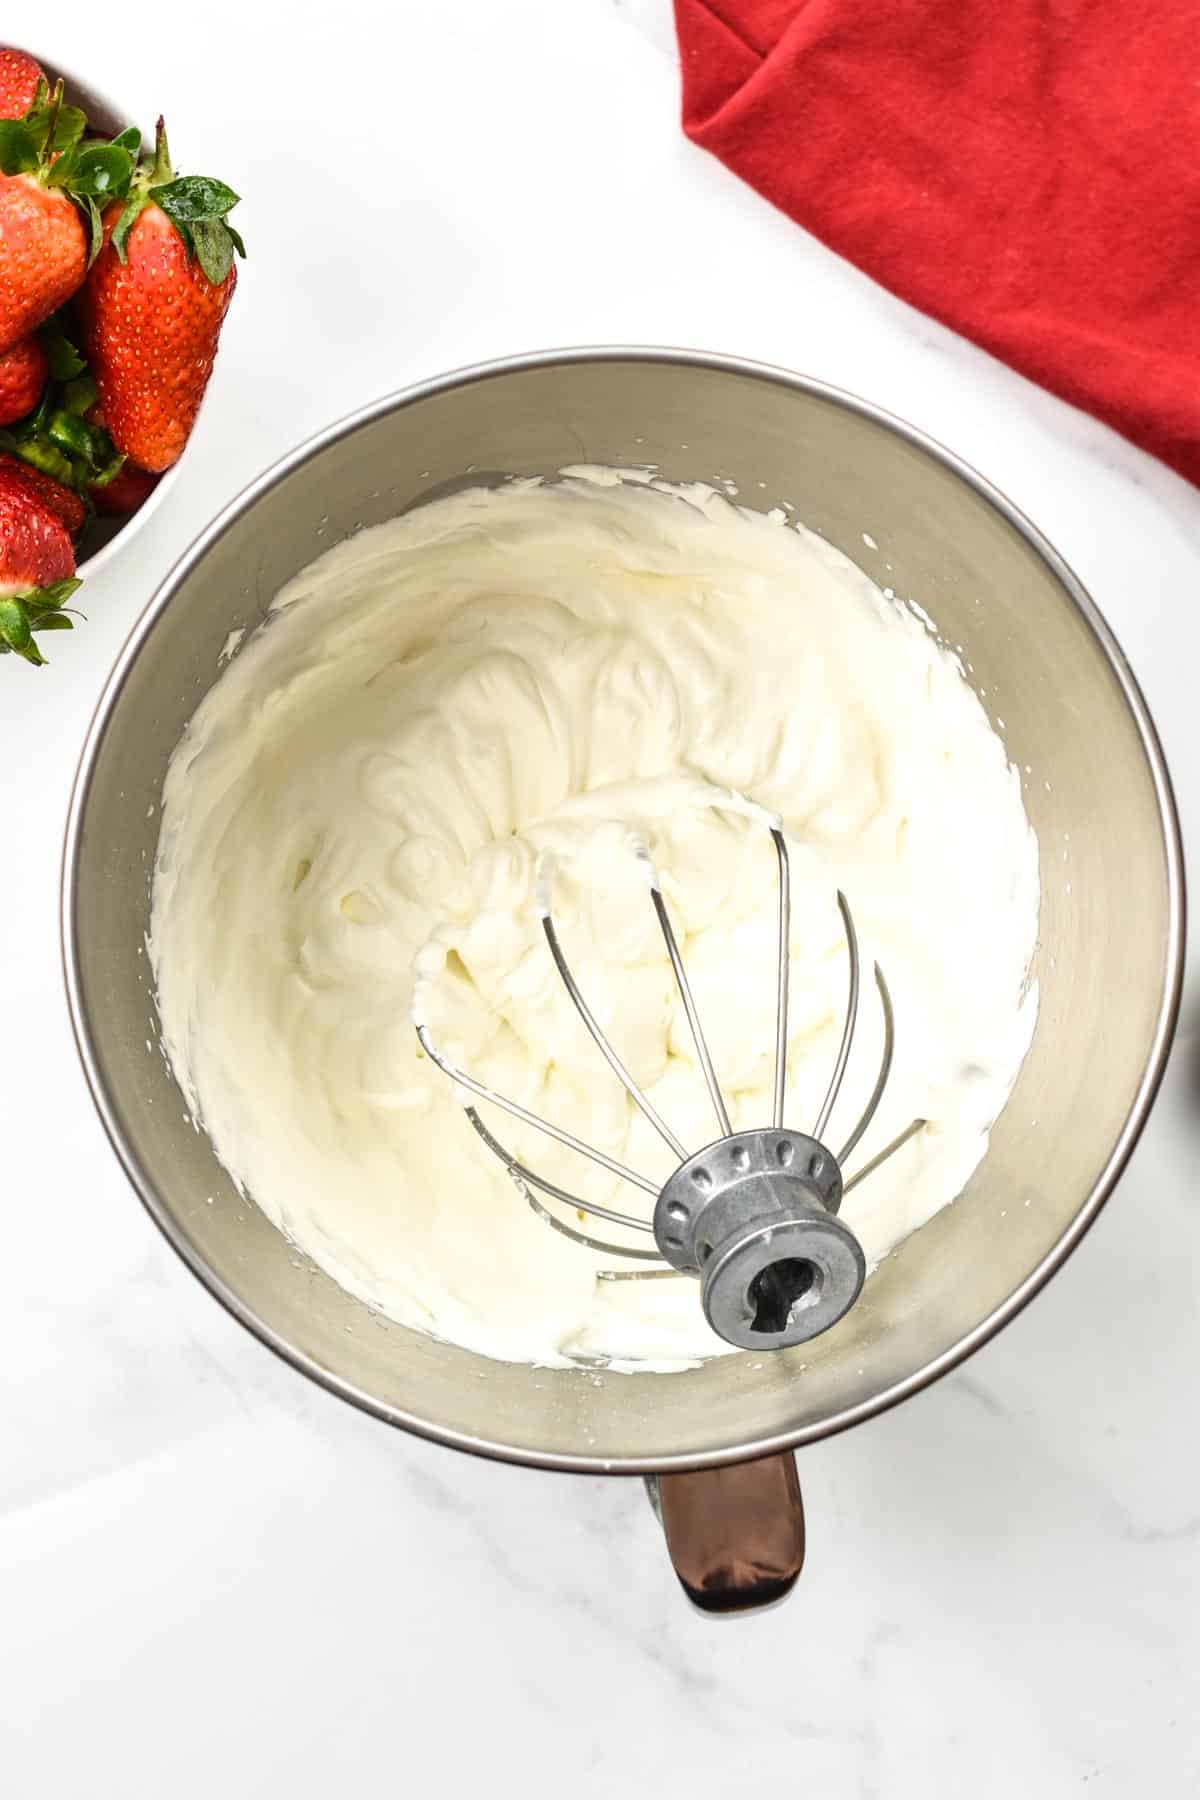 A bowl filled with homemade vegan whipped cream and a metallic whisk in the bowl.